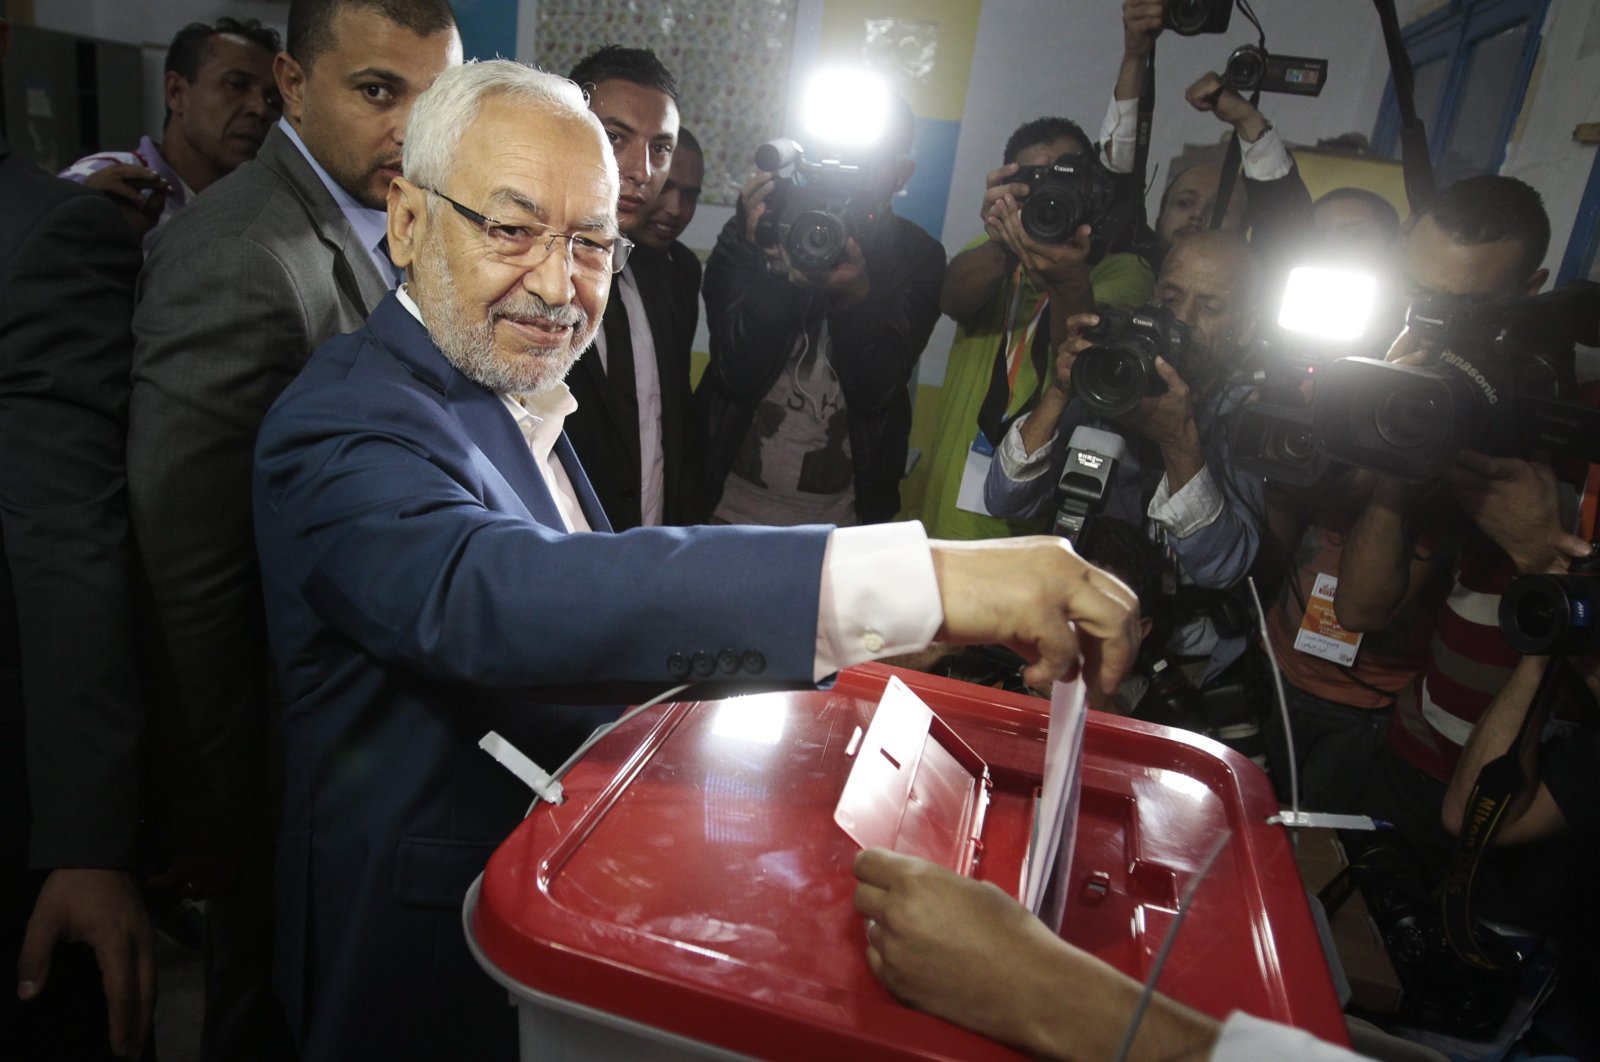 Rached Ghannouchi, leader of Tunisia's Ennahdha party, casts his vote at a polling station in Tunis, Tunisia, Oct. 26, 2014. (Reuters Photo)